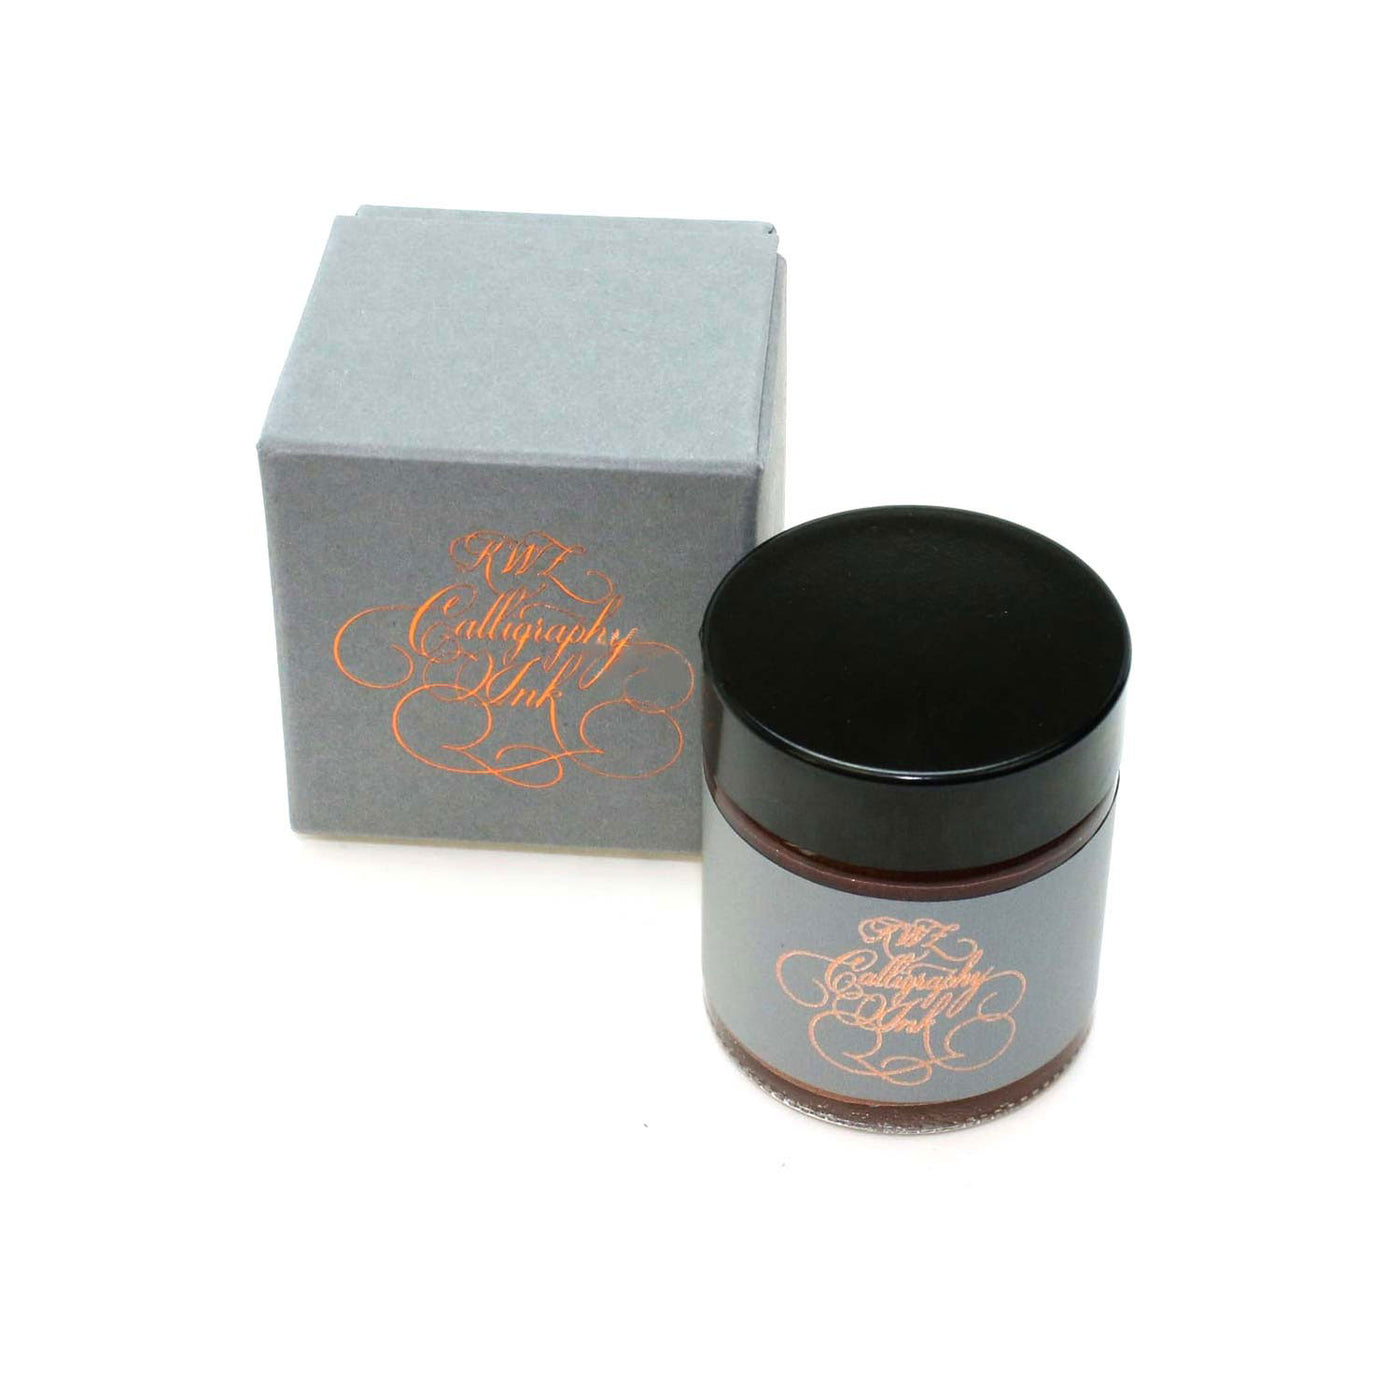 Kwz Calligraphy Inks Copper Red - 25ml